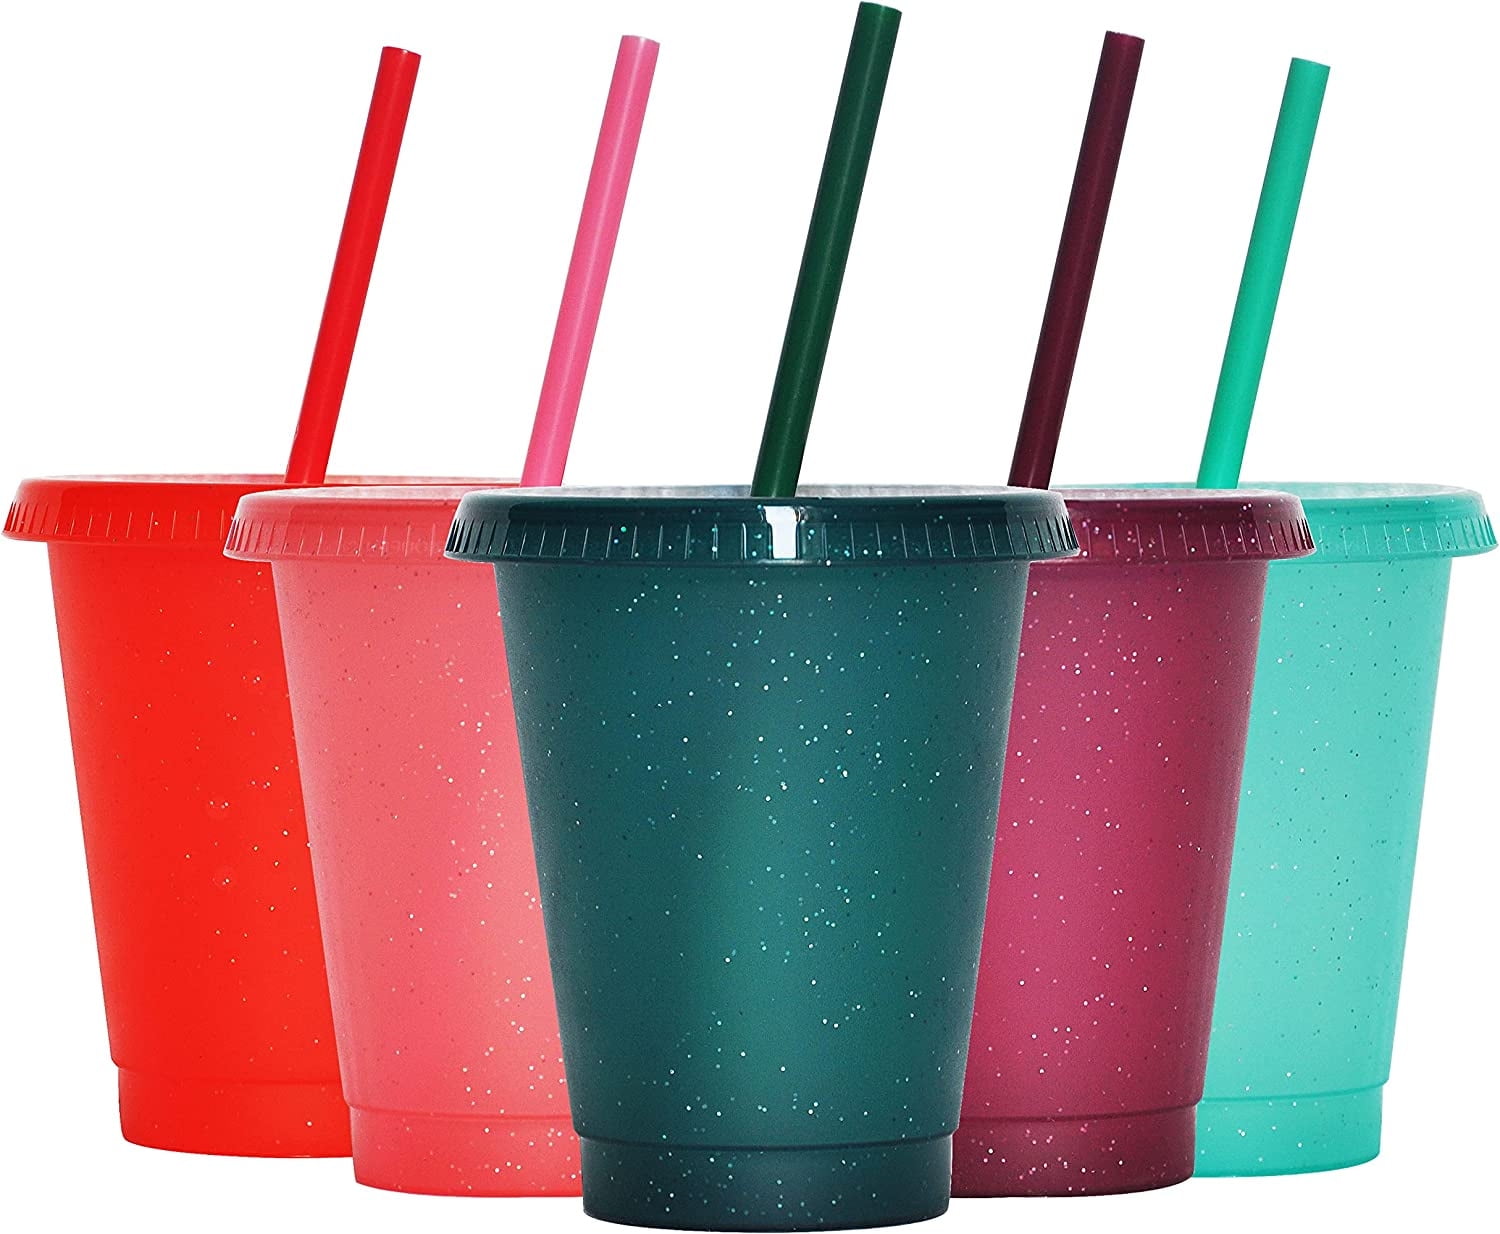 Casewin 7 Pack 12oz Plastic Kids Cups with Lids & Straws